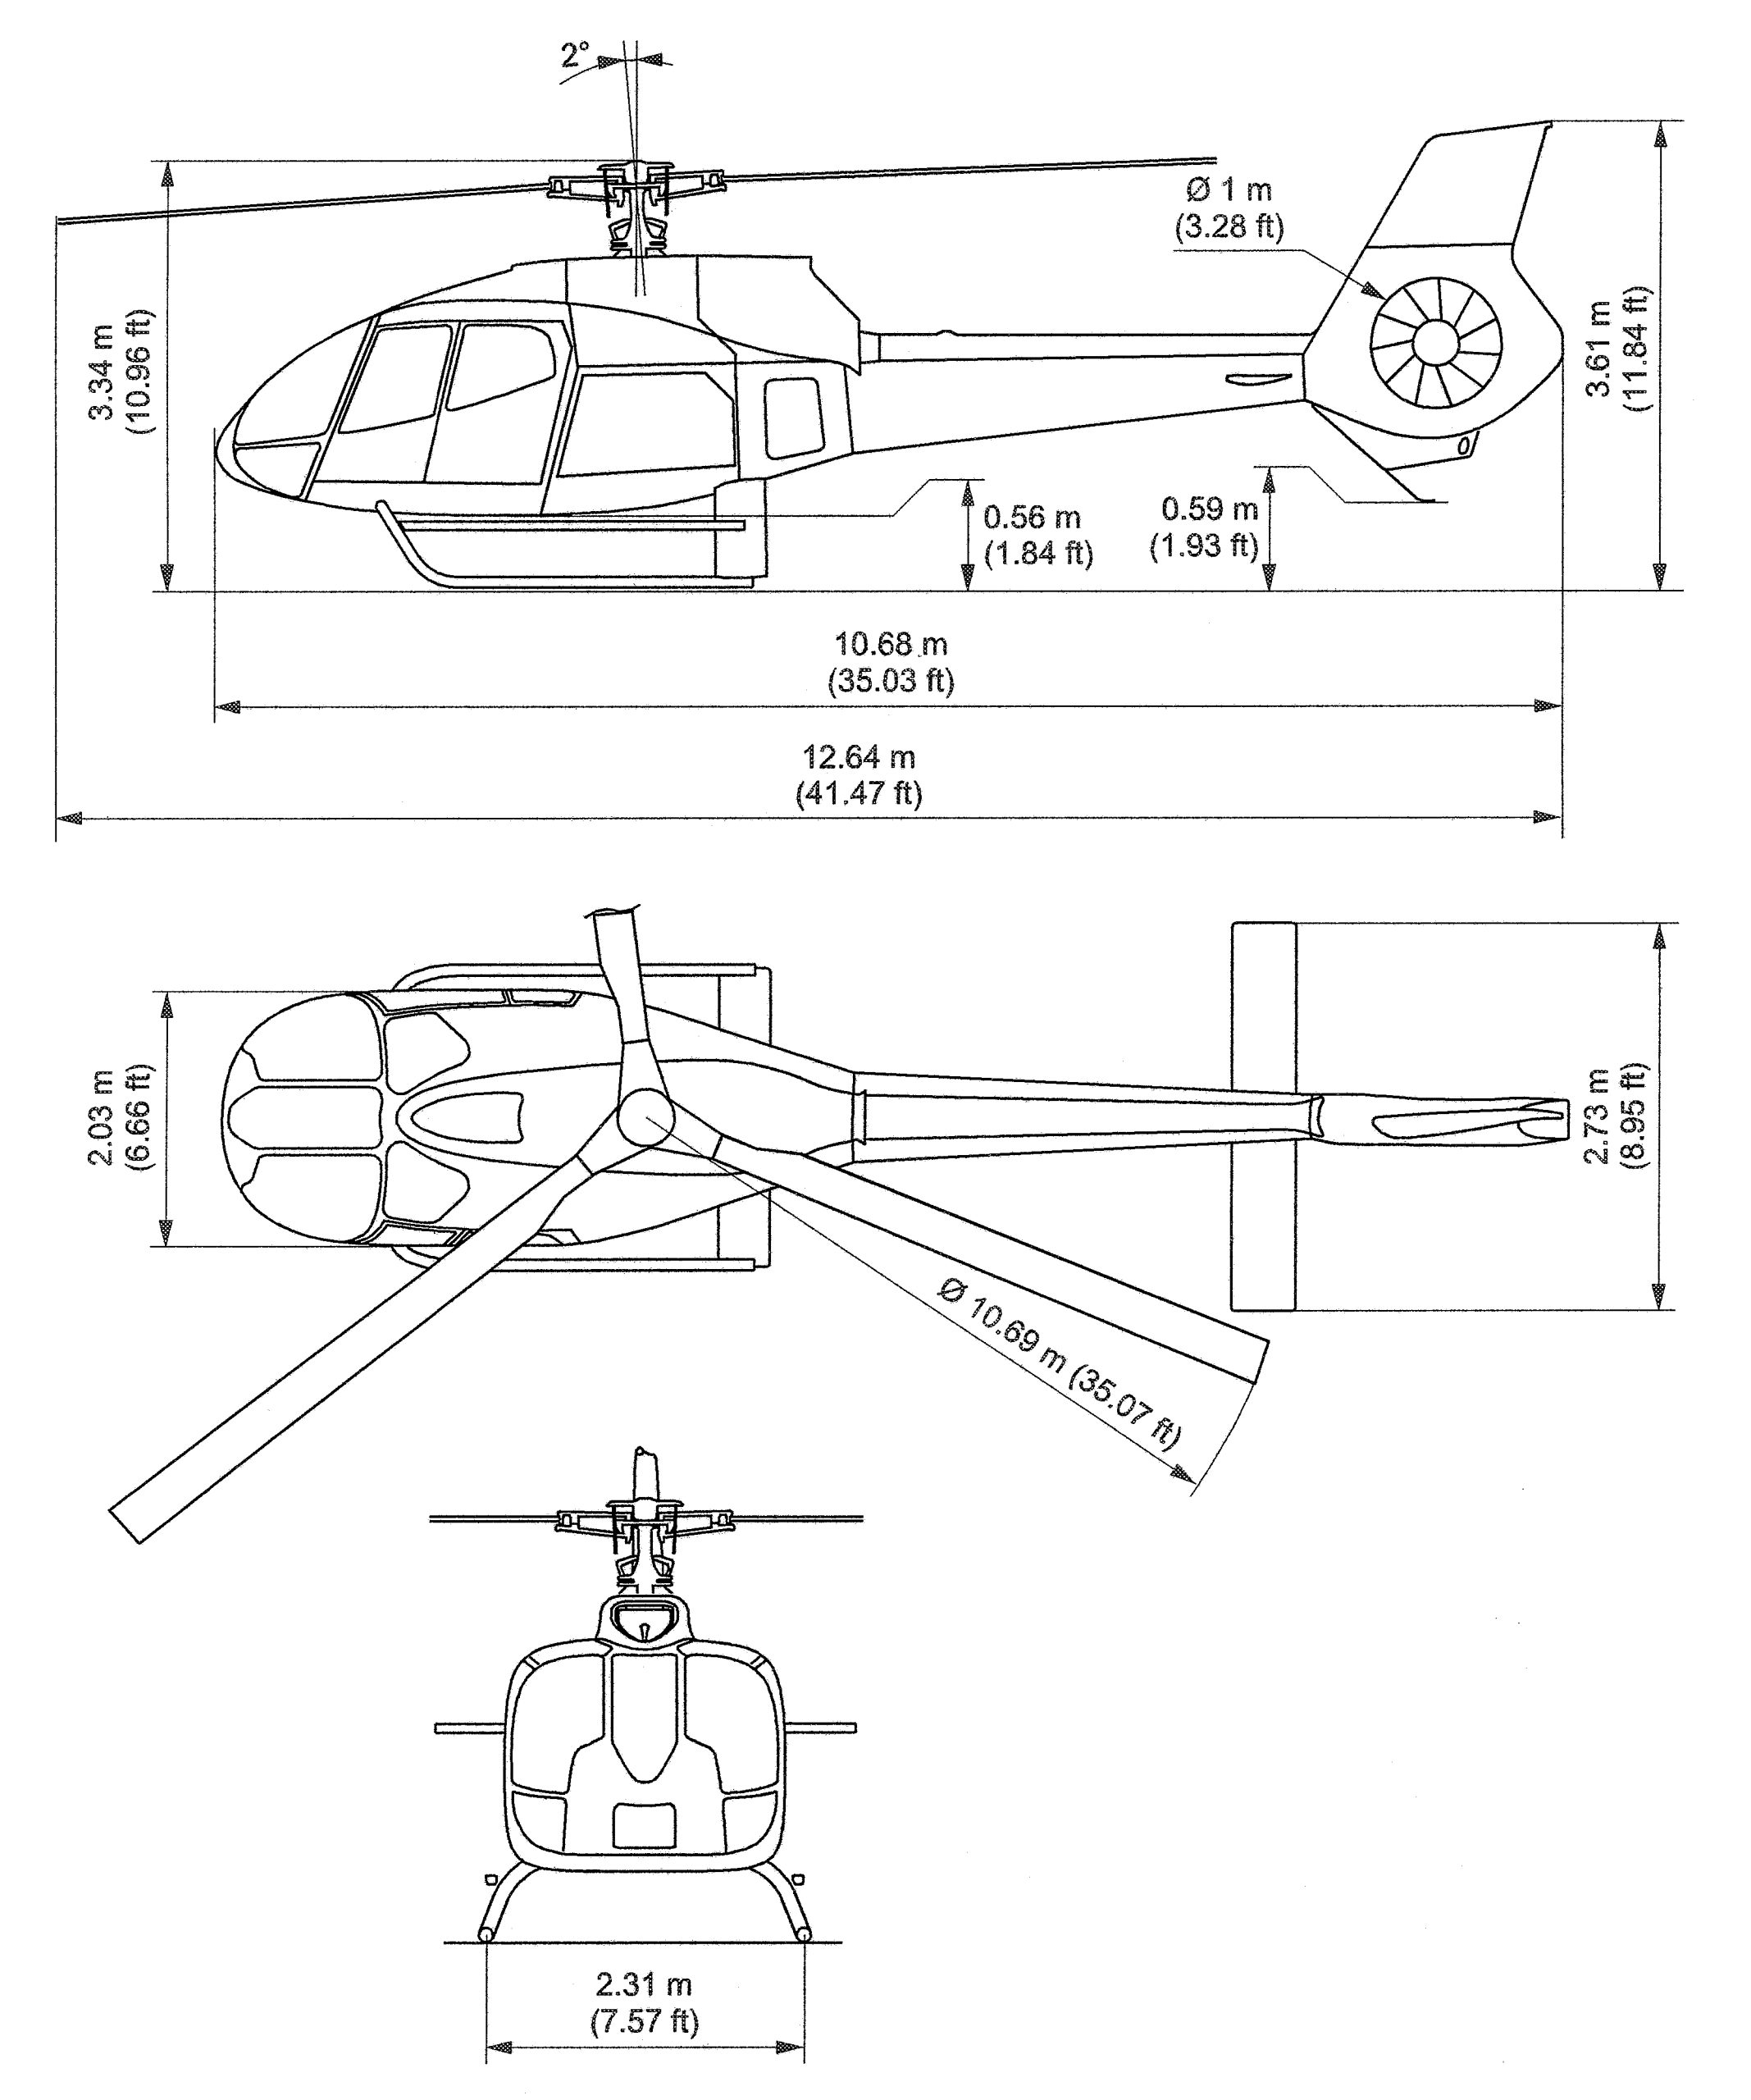 Airbus H130 Specifications